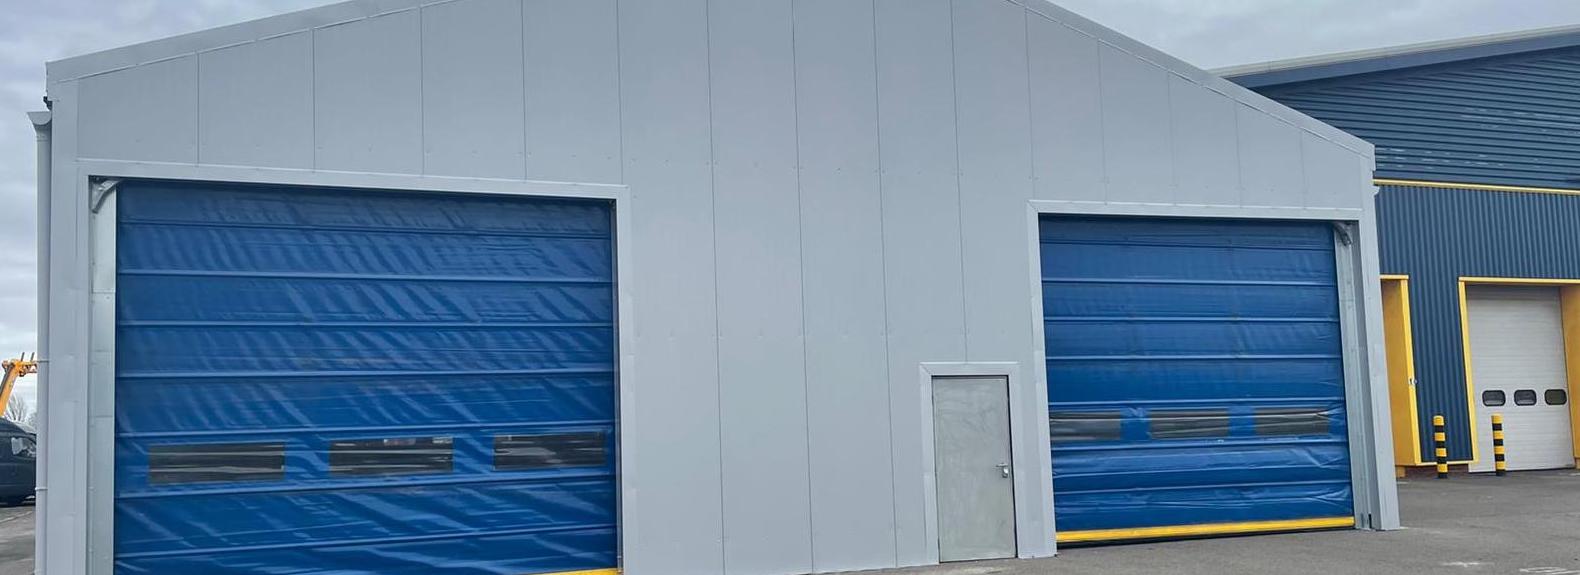 Temporary building with blue doors